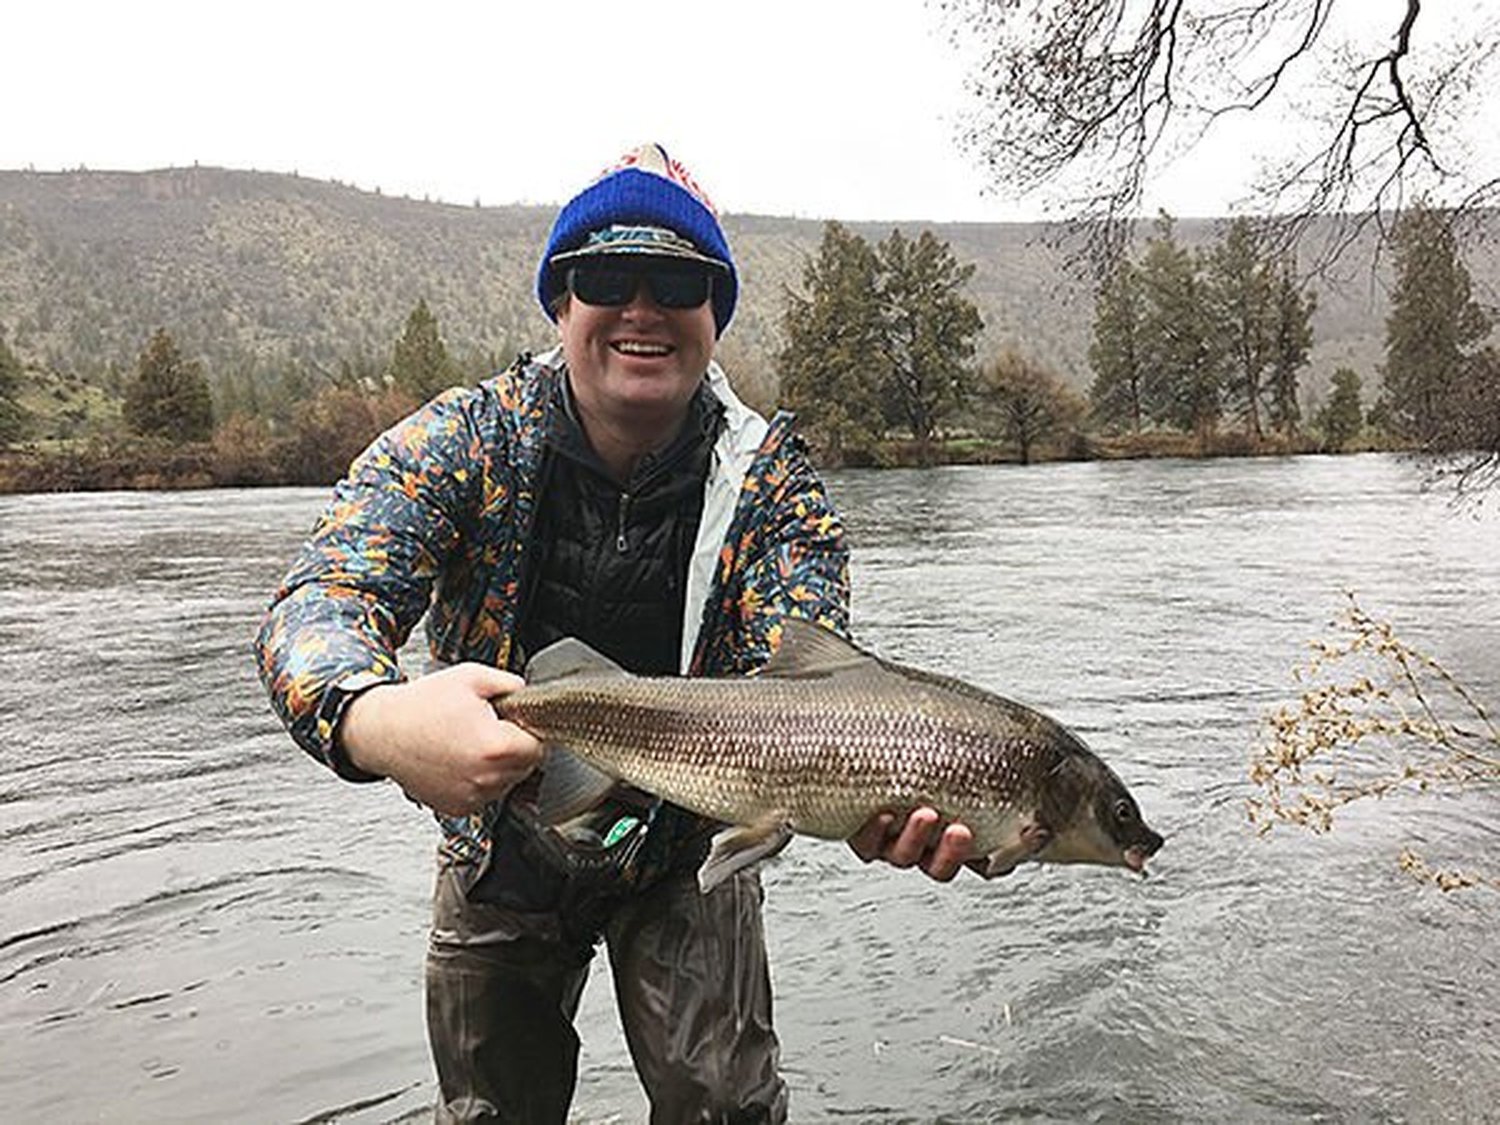 Alex Dietz of Bend, Oregon, was fly fishing with an egg pattern on the Deschutes River outside Warm Springs on Dec. 19 when he hooked a 5-pound, 12-ounce, 24-inch long mountain whitefish with a 14-inch girth.